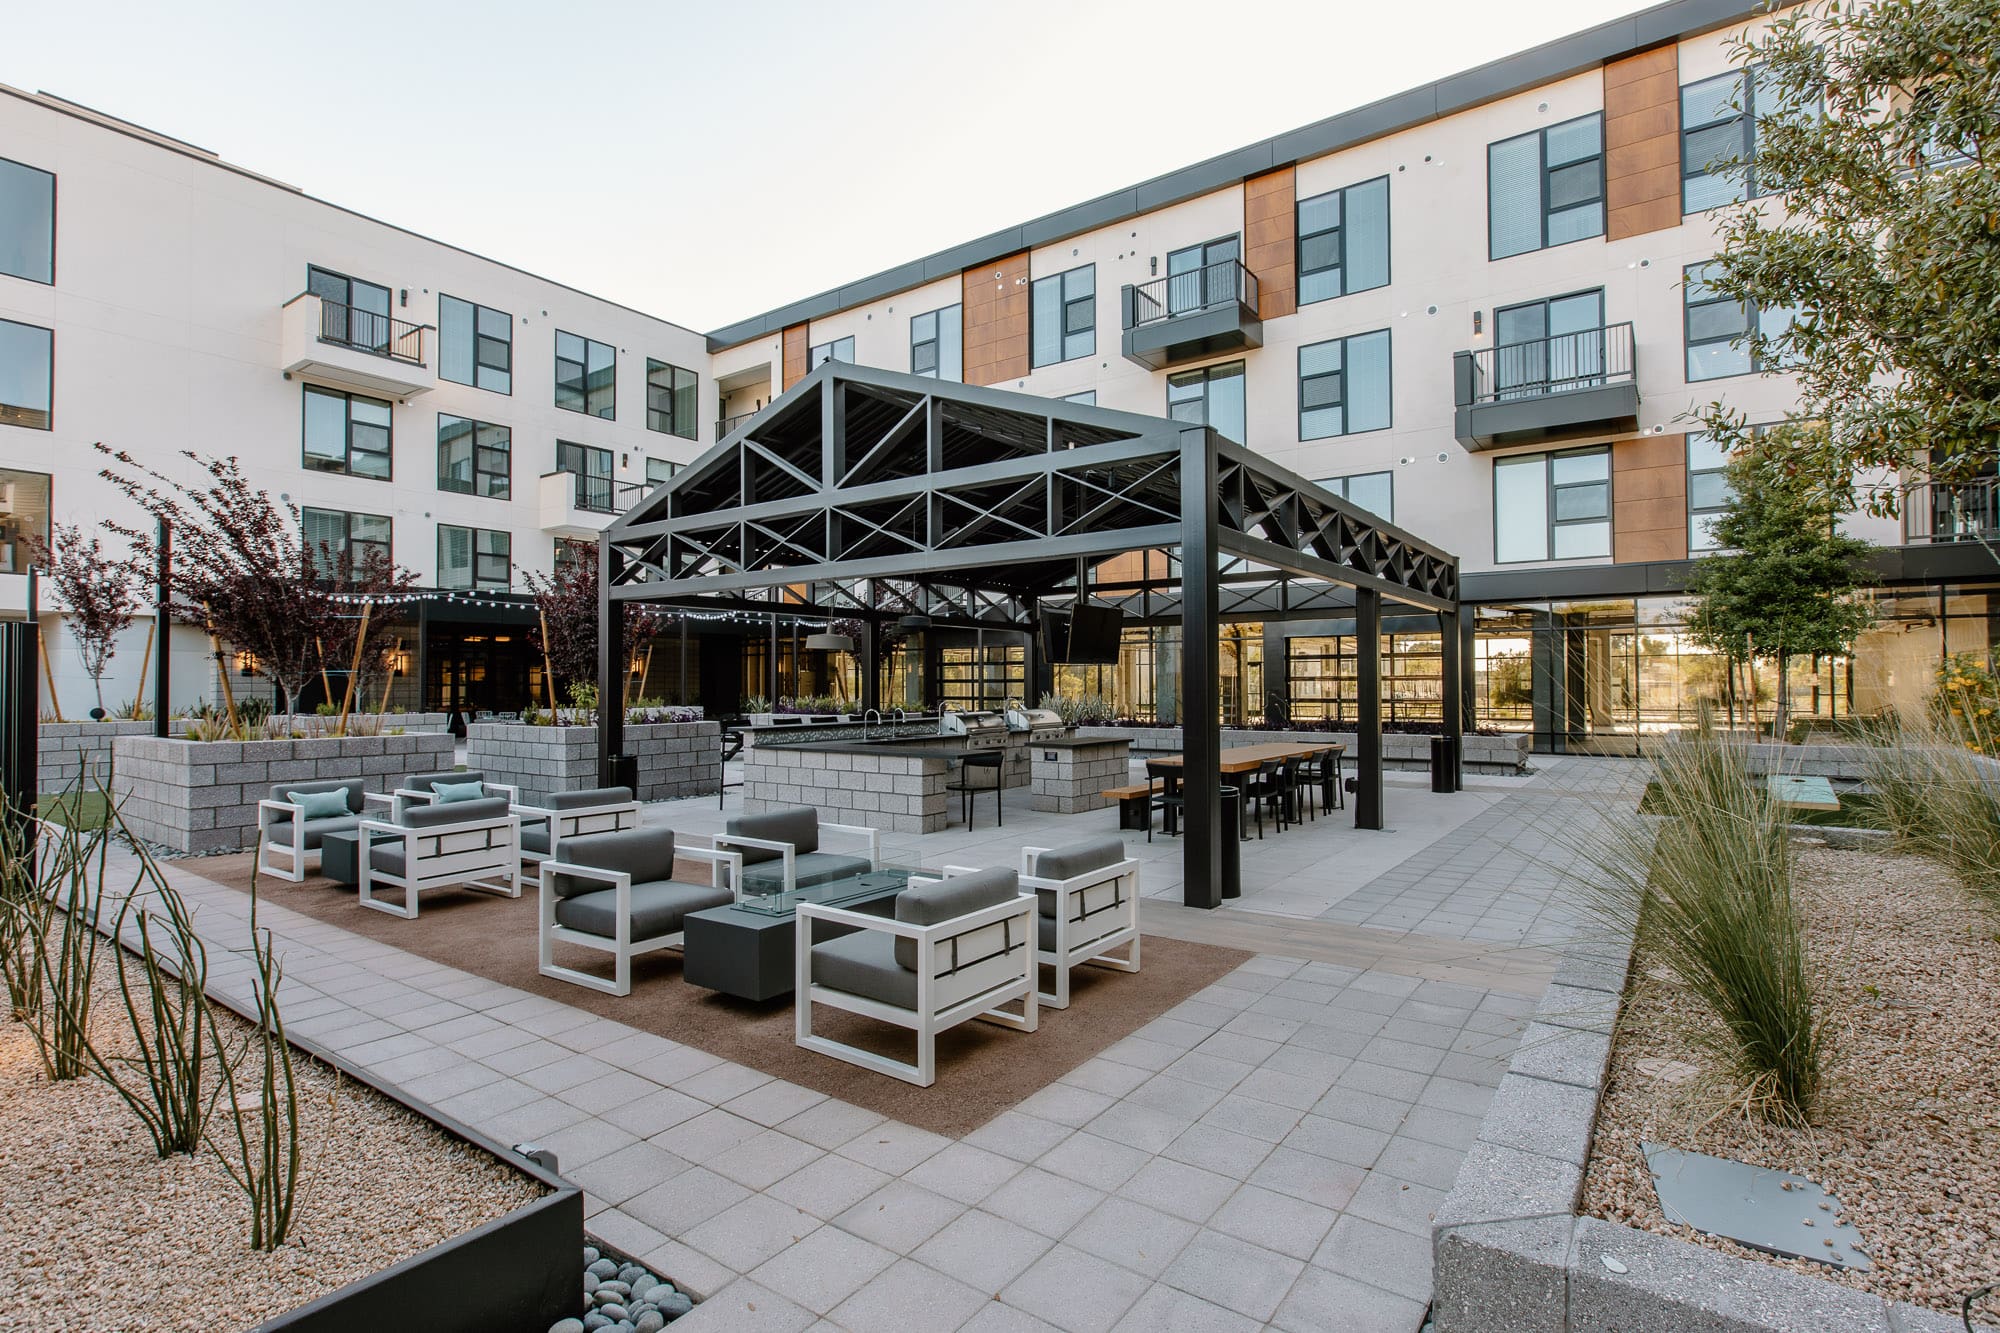 Modern apartment complex courtyard featuring neatly arranged patio furniture under a large pergola, surrounded by well-maintained garden areas.